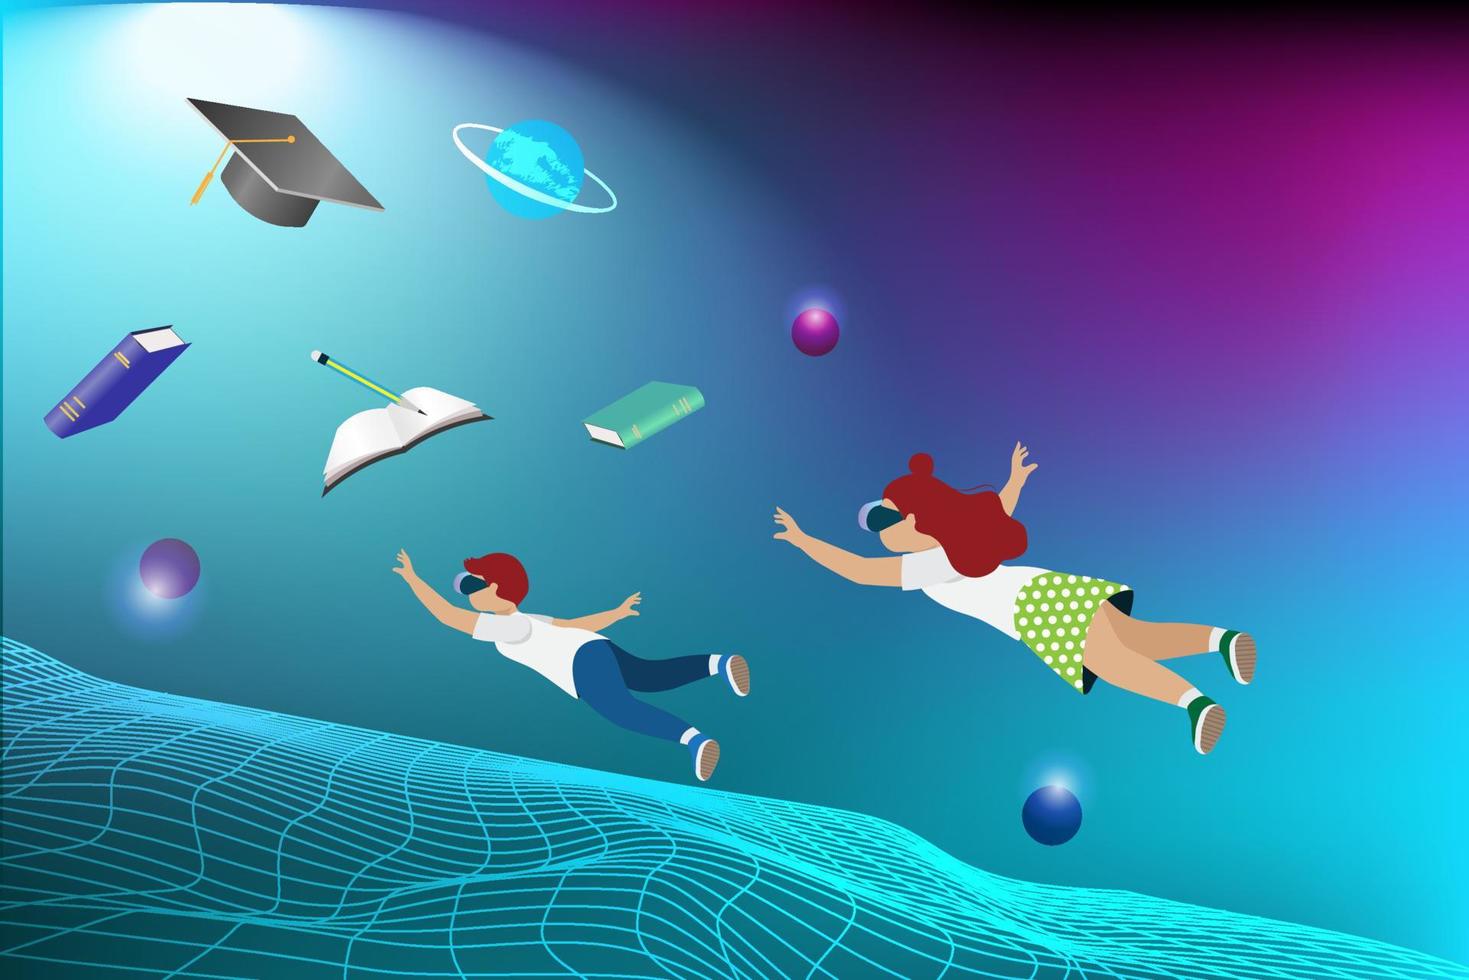 Metaverse virtual  education technology. Kids wear VR goggle glass flying to experience 3D space simulation interface on smart phone screen. vector